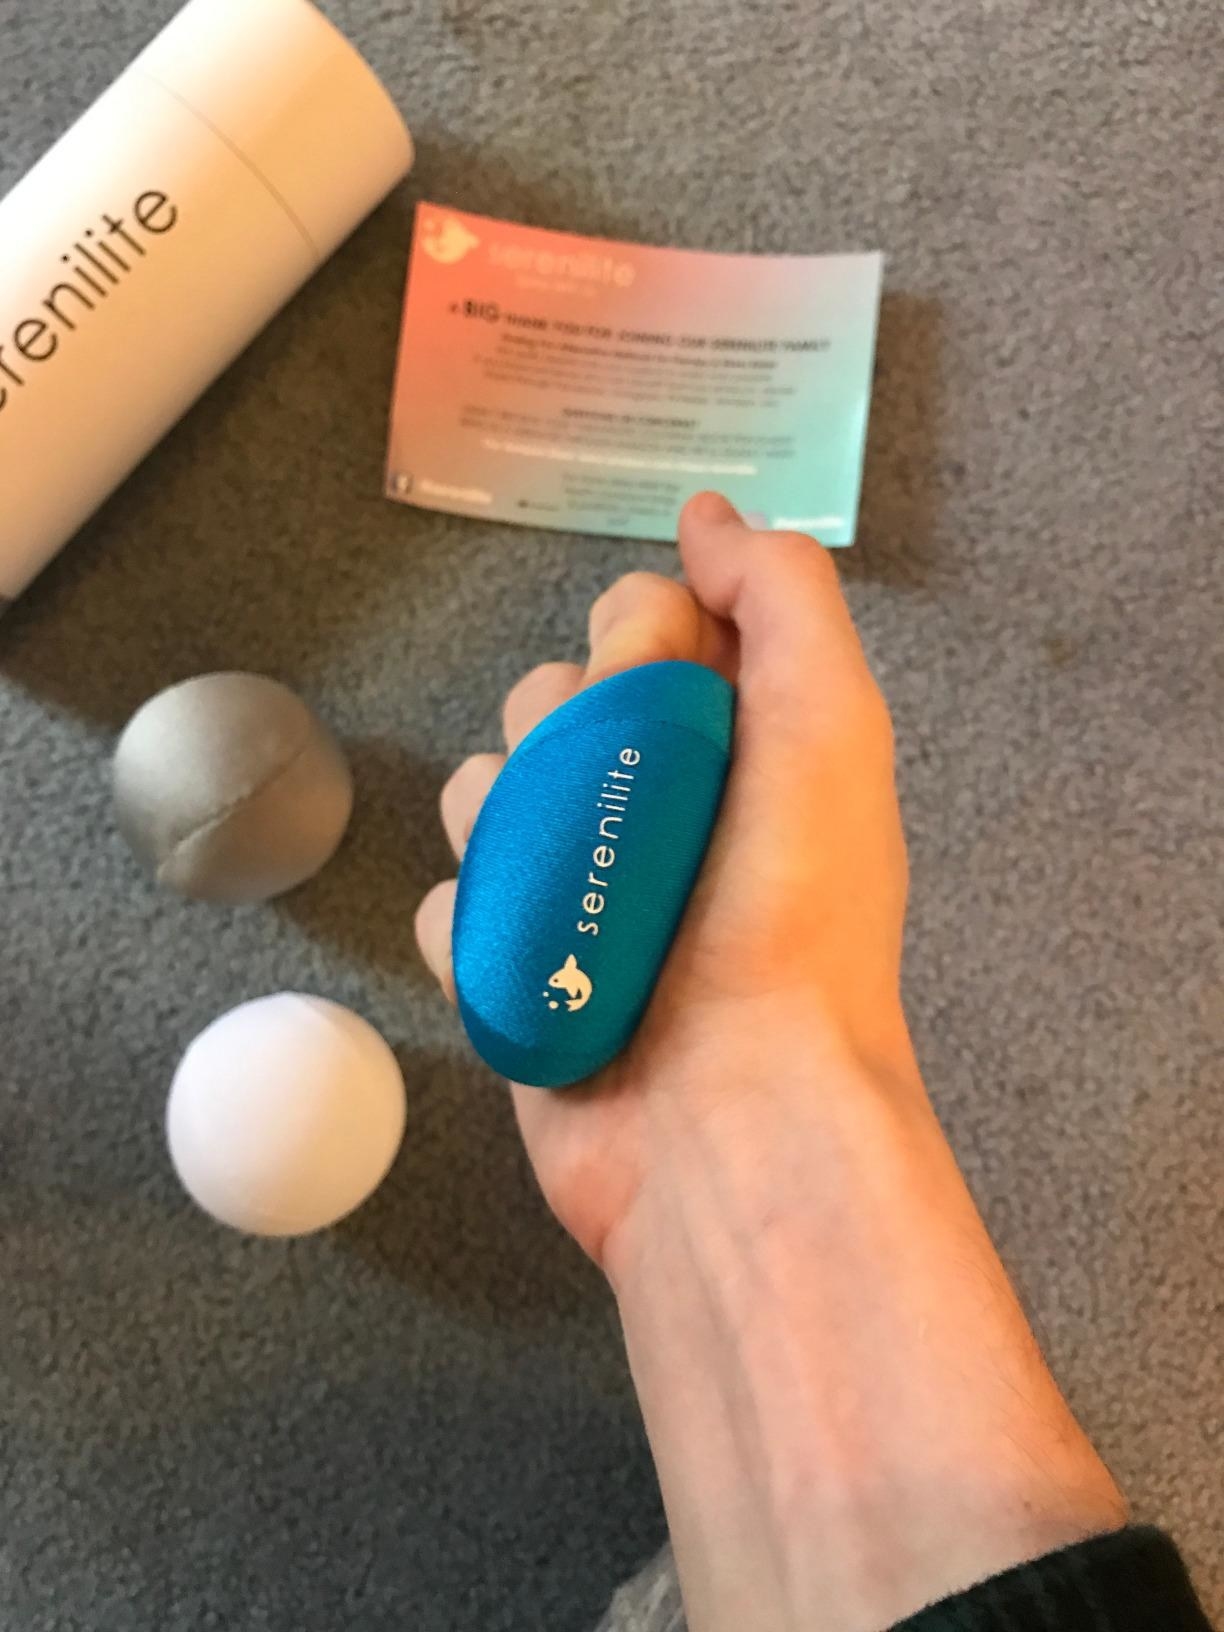 reviewer image of a hand squeezing one of the serenilite hand therapy balls